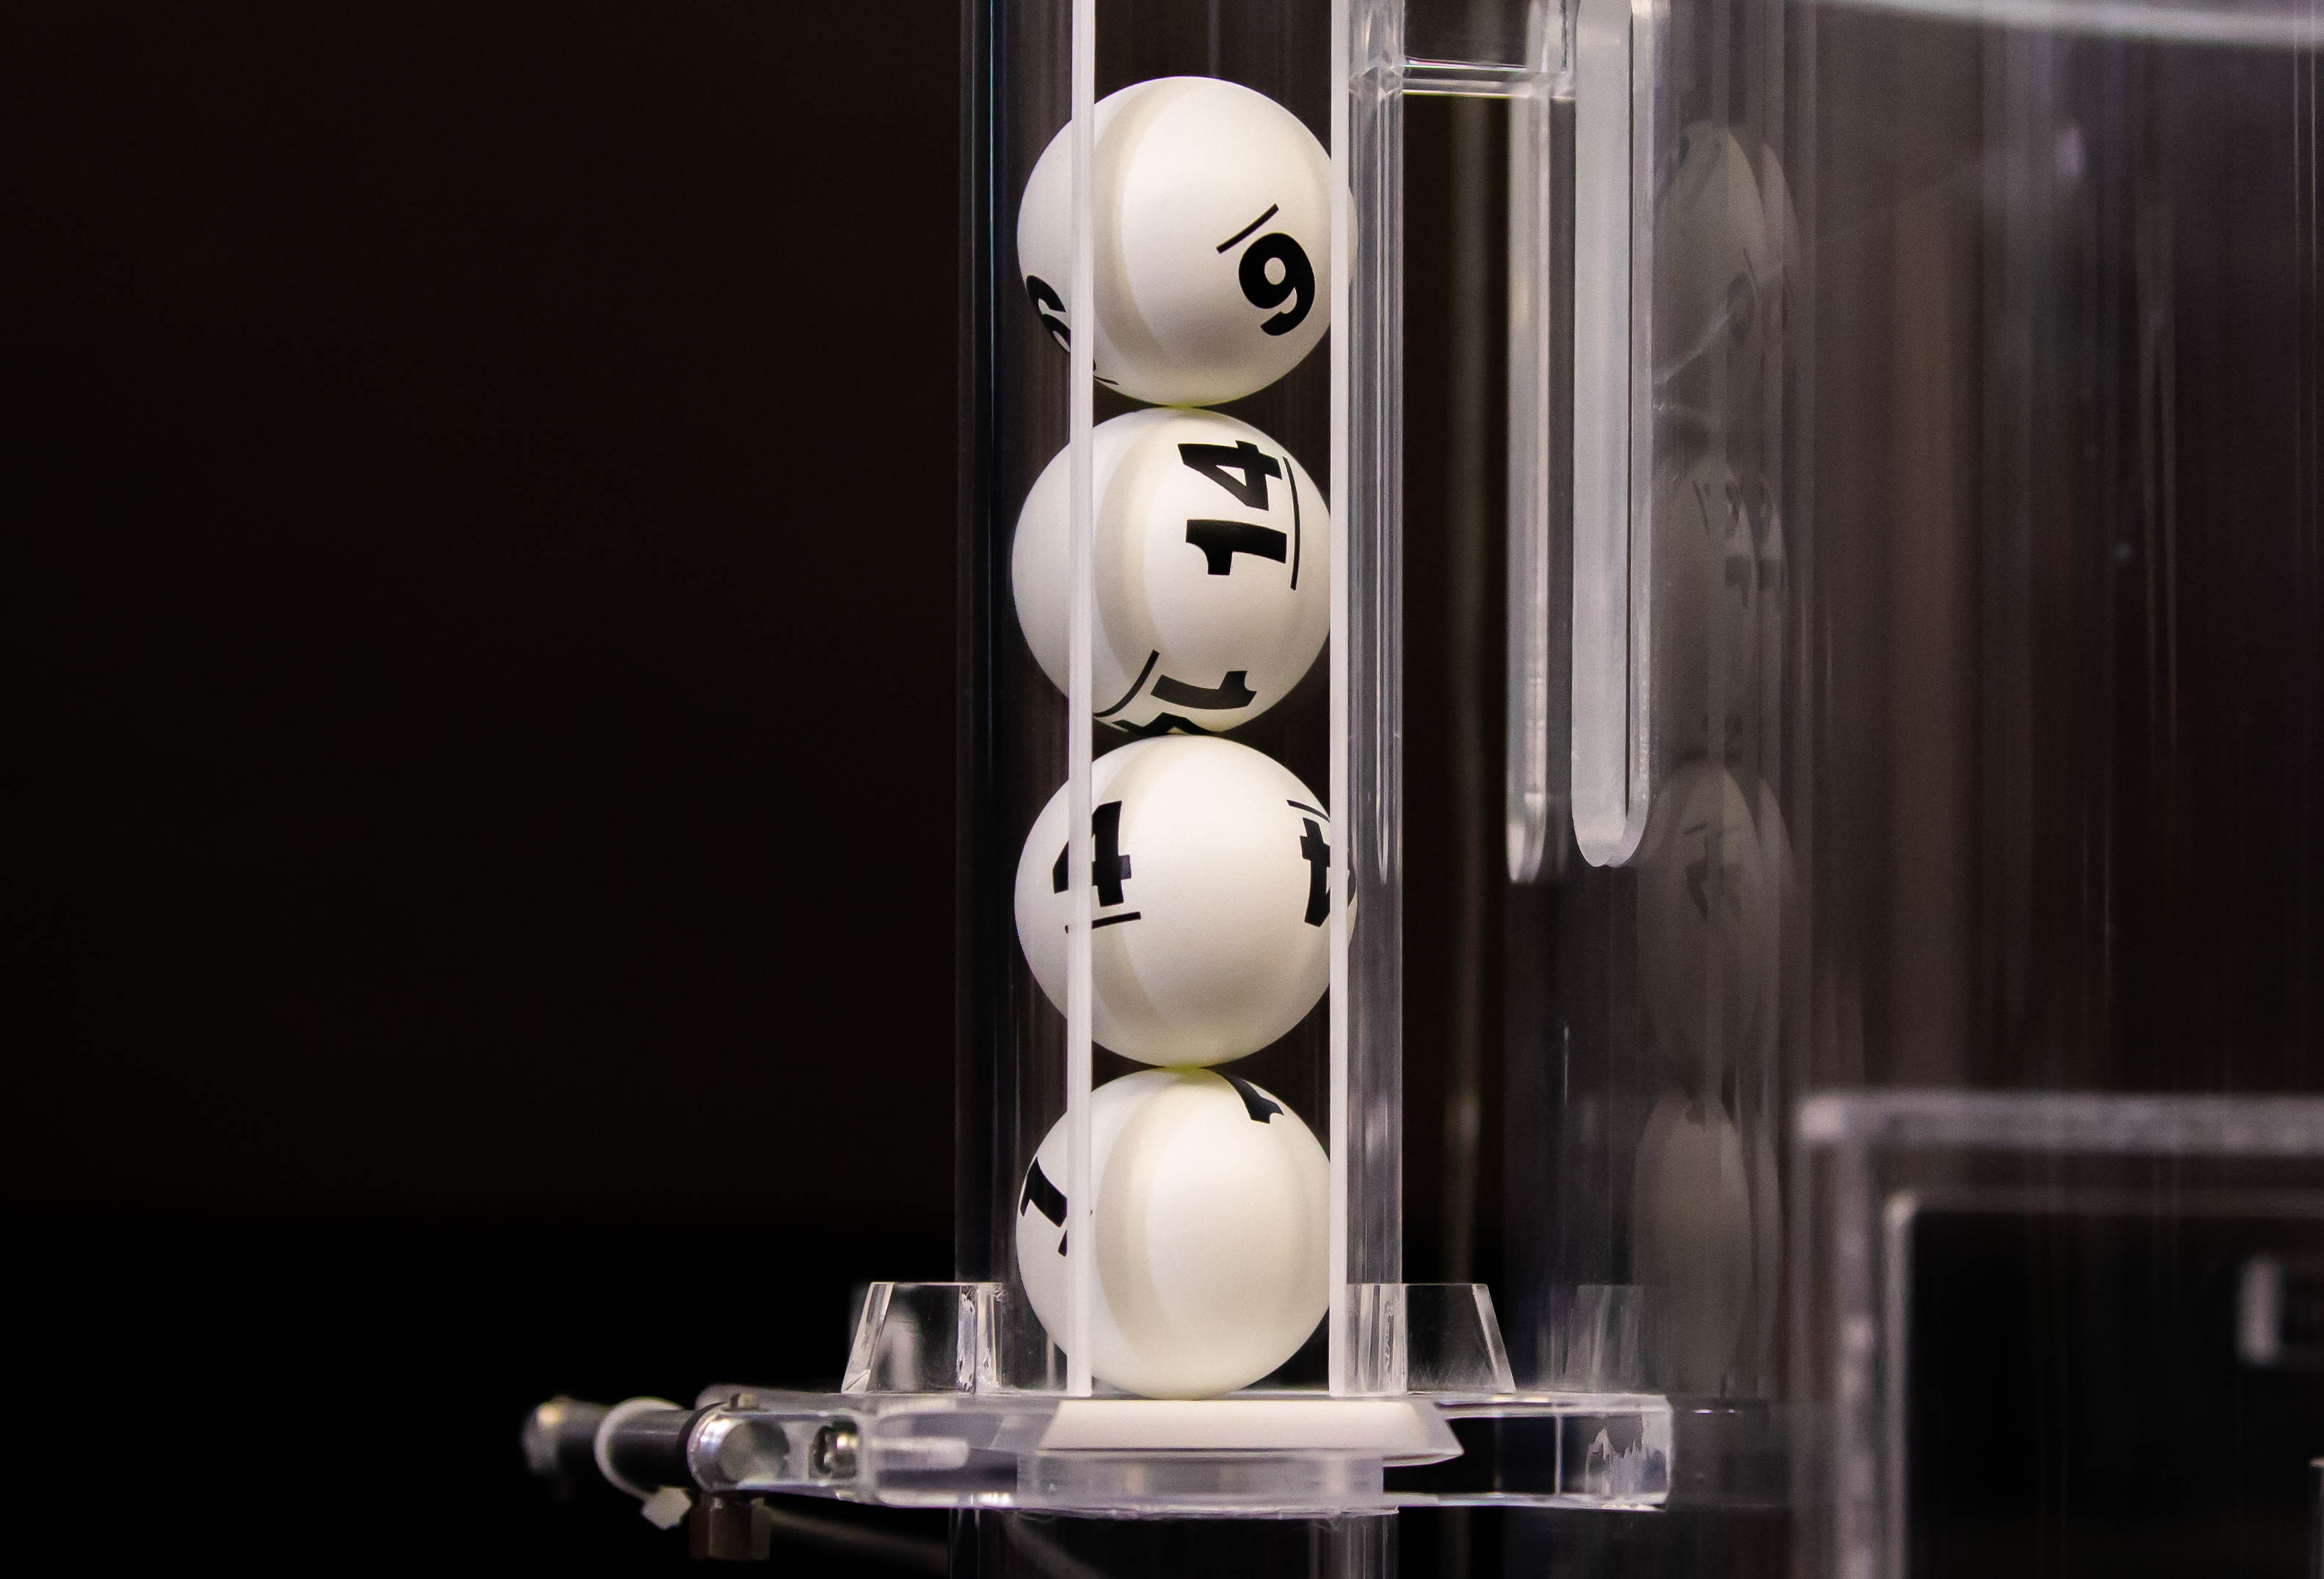 lotto results for 3 august 2019